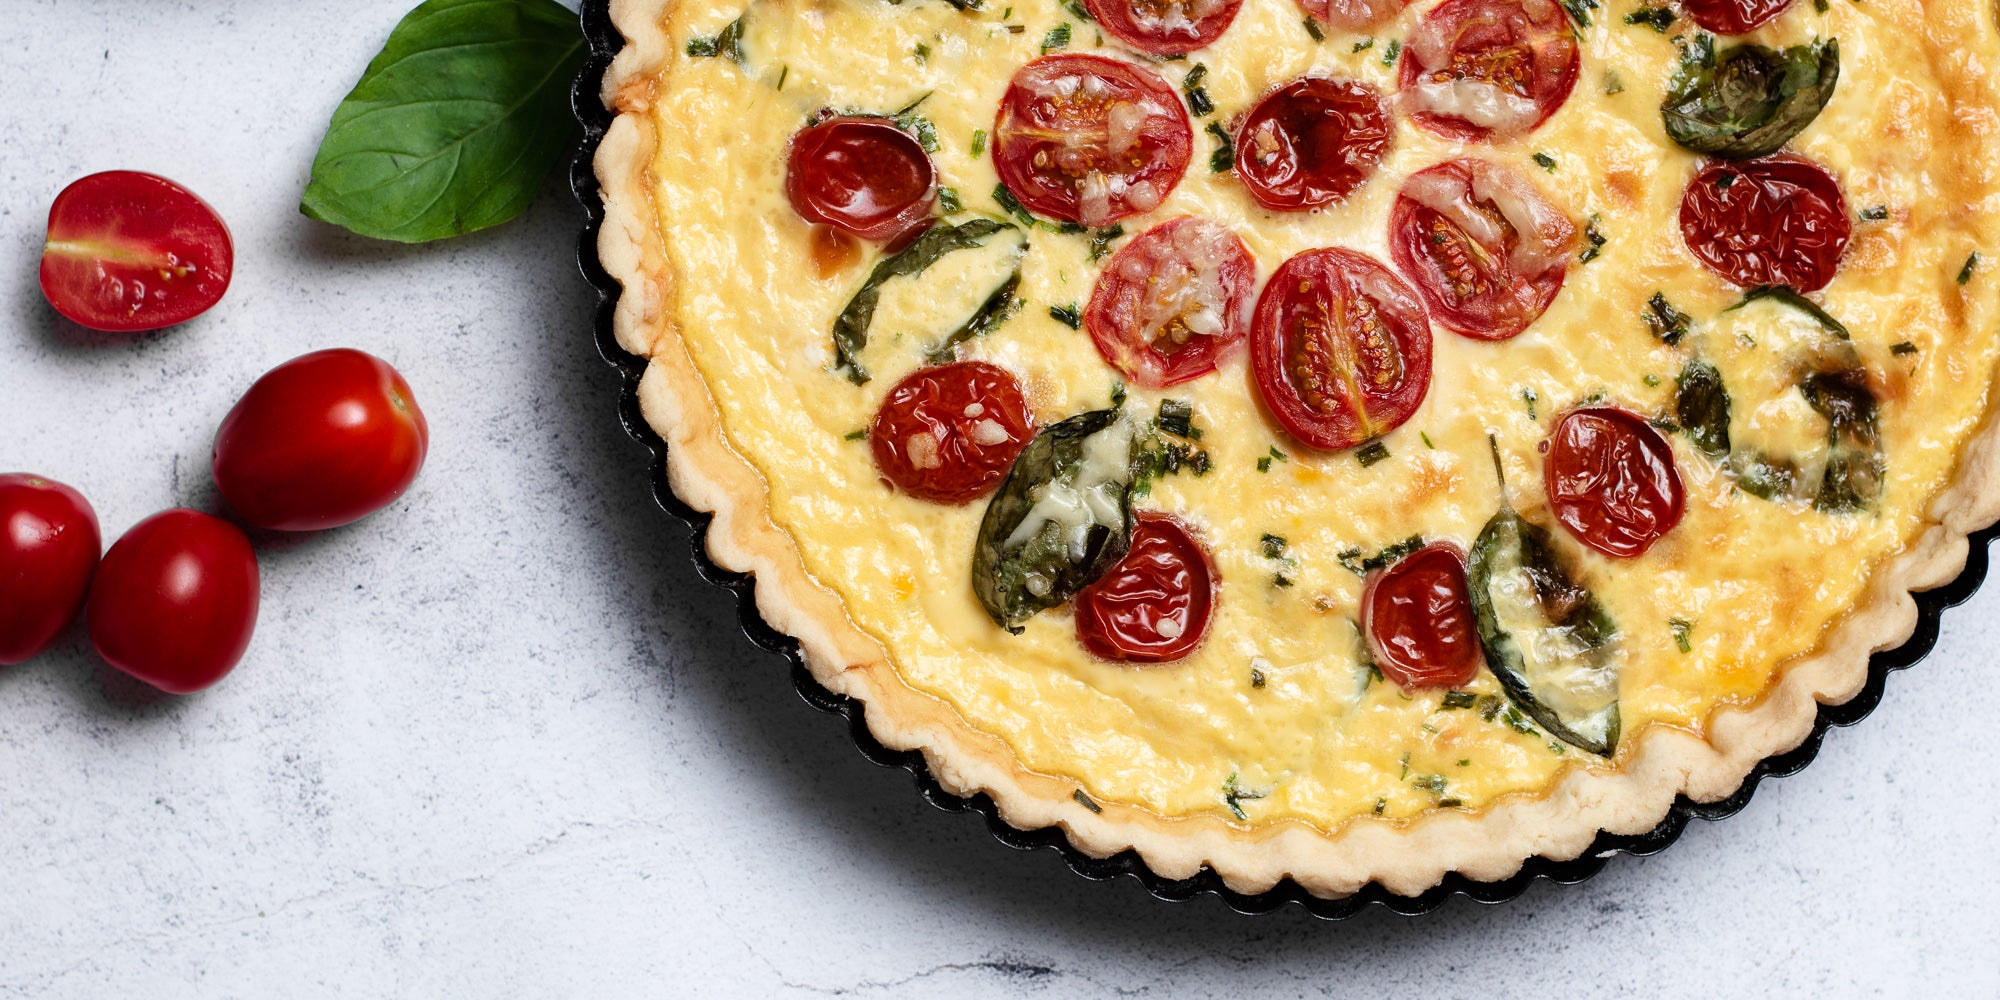 Close up of a Cheese & Tomato Quiche with whole tomatoes and a basil leaf in a pastry baking tray